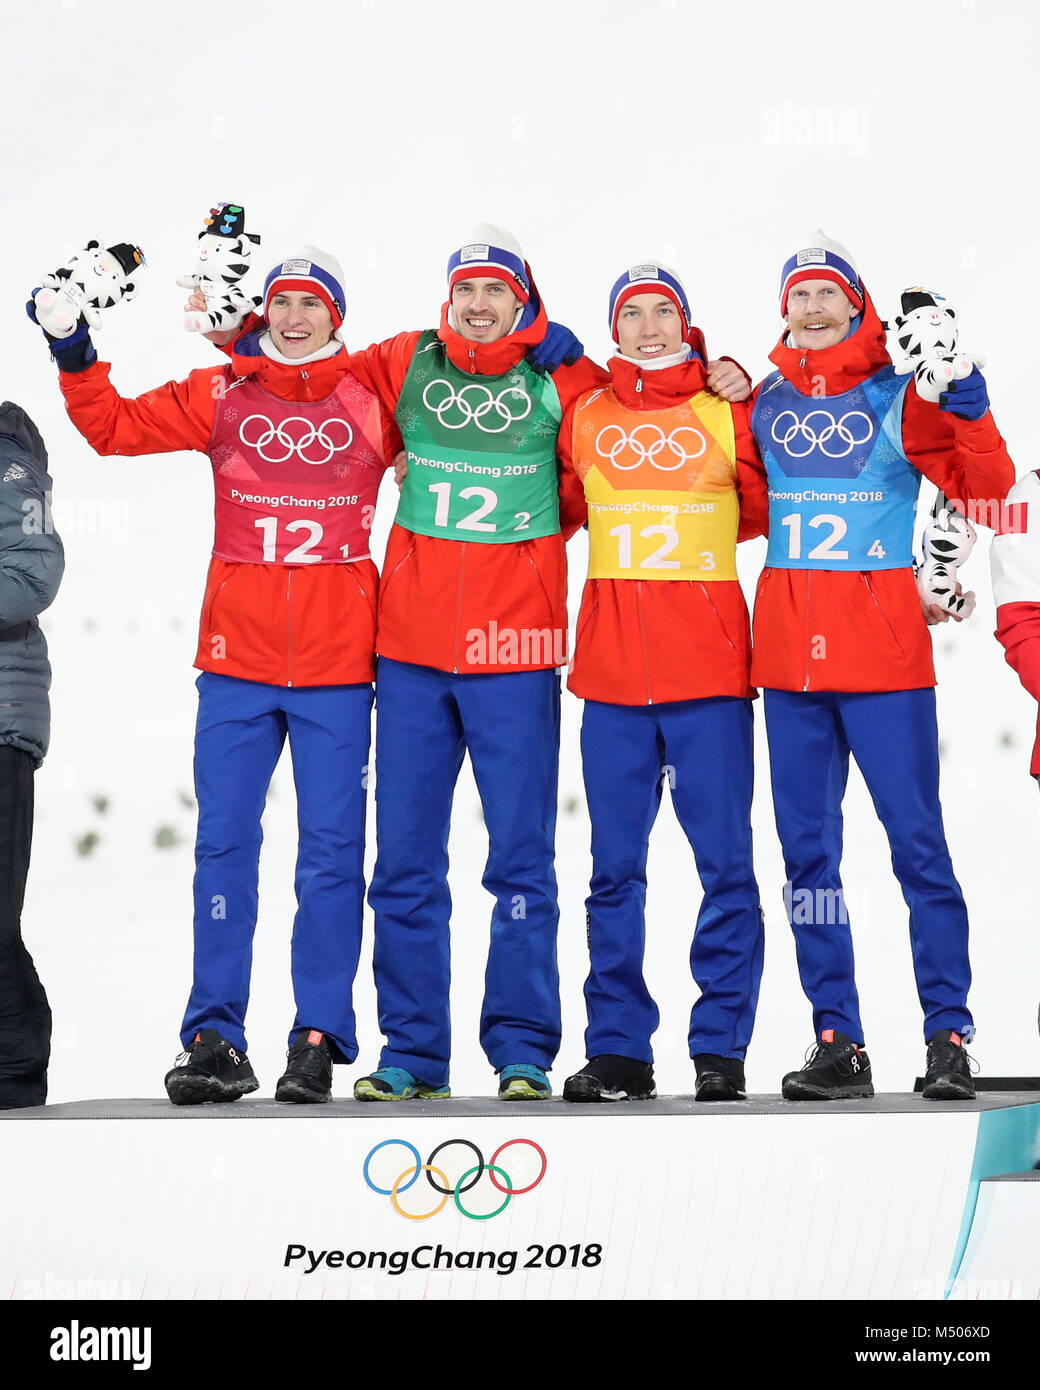 Pyeongchang, South Korea. 19th Feb, 2018. Team Norway's Daniel Andre Tande, Andreas Stjernen, Johann Andre Forfang and Robert Johansson (L to R) pose for photos during venue ceremony of men's team event of ski jumping at 2018 PyeongChang Winter Olympic Games at Alpensia Ski Jumping Centre, PyeongChang, South Korea, Feb. 19, 2018. Team Norway claimed champion with 1098.5 points. Credit: Li Gang/Xinhua/Alamy Live News Stock Photo